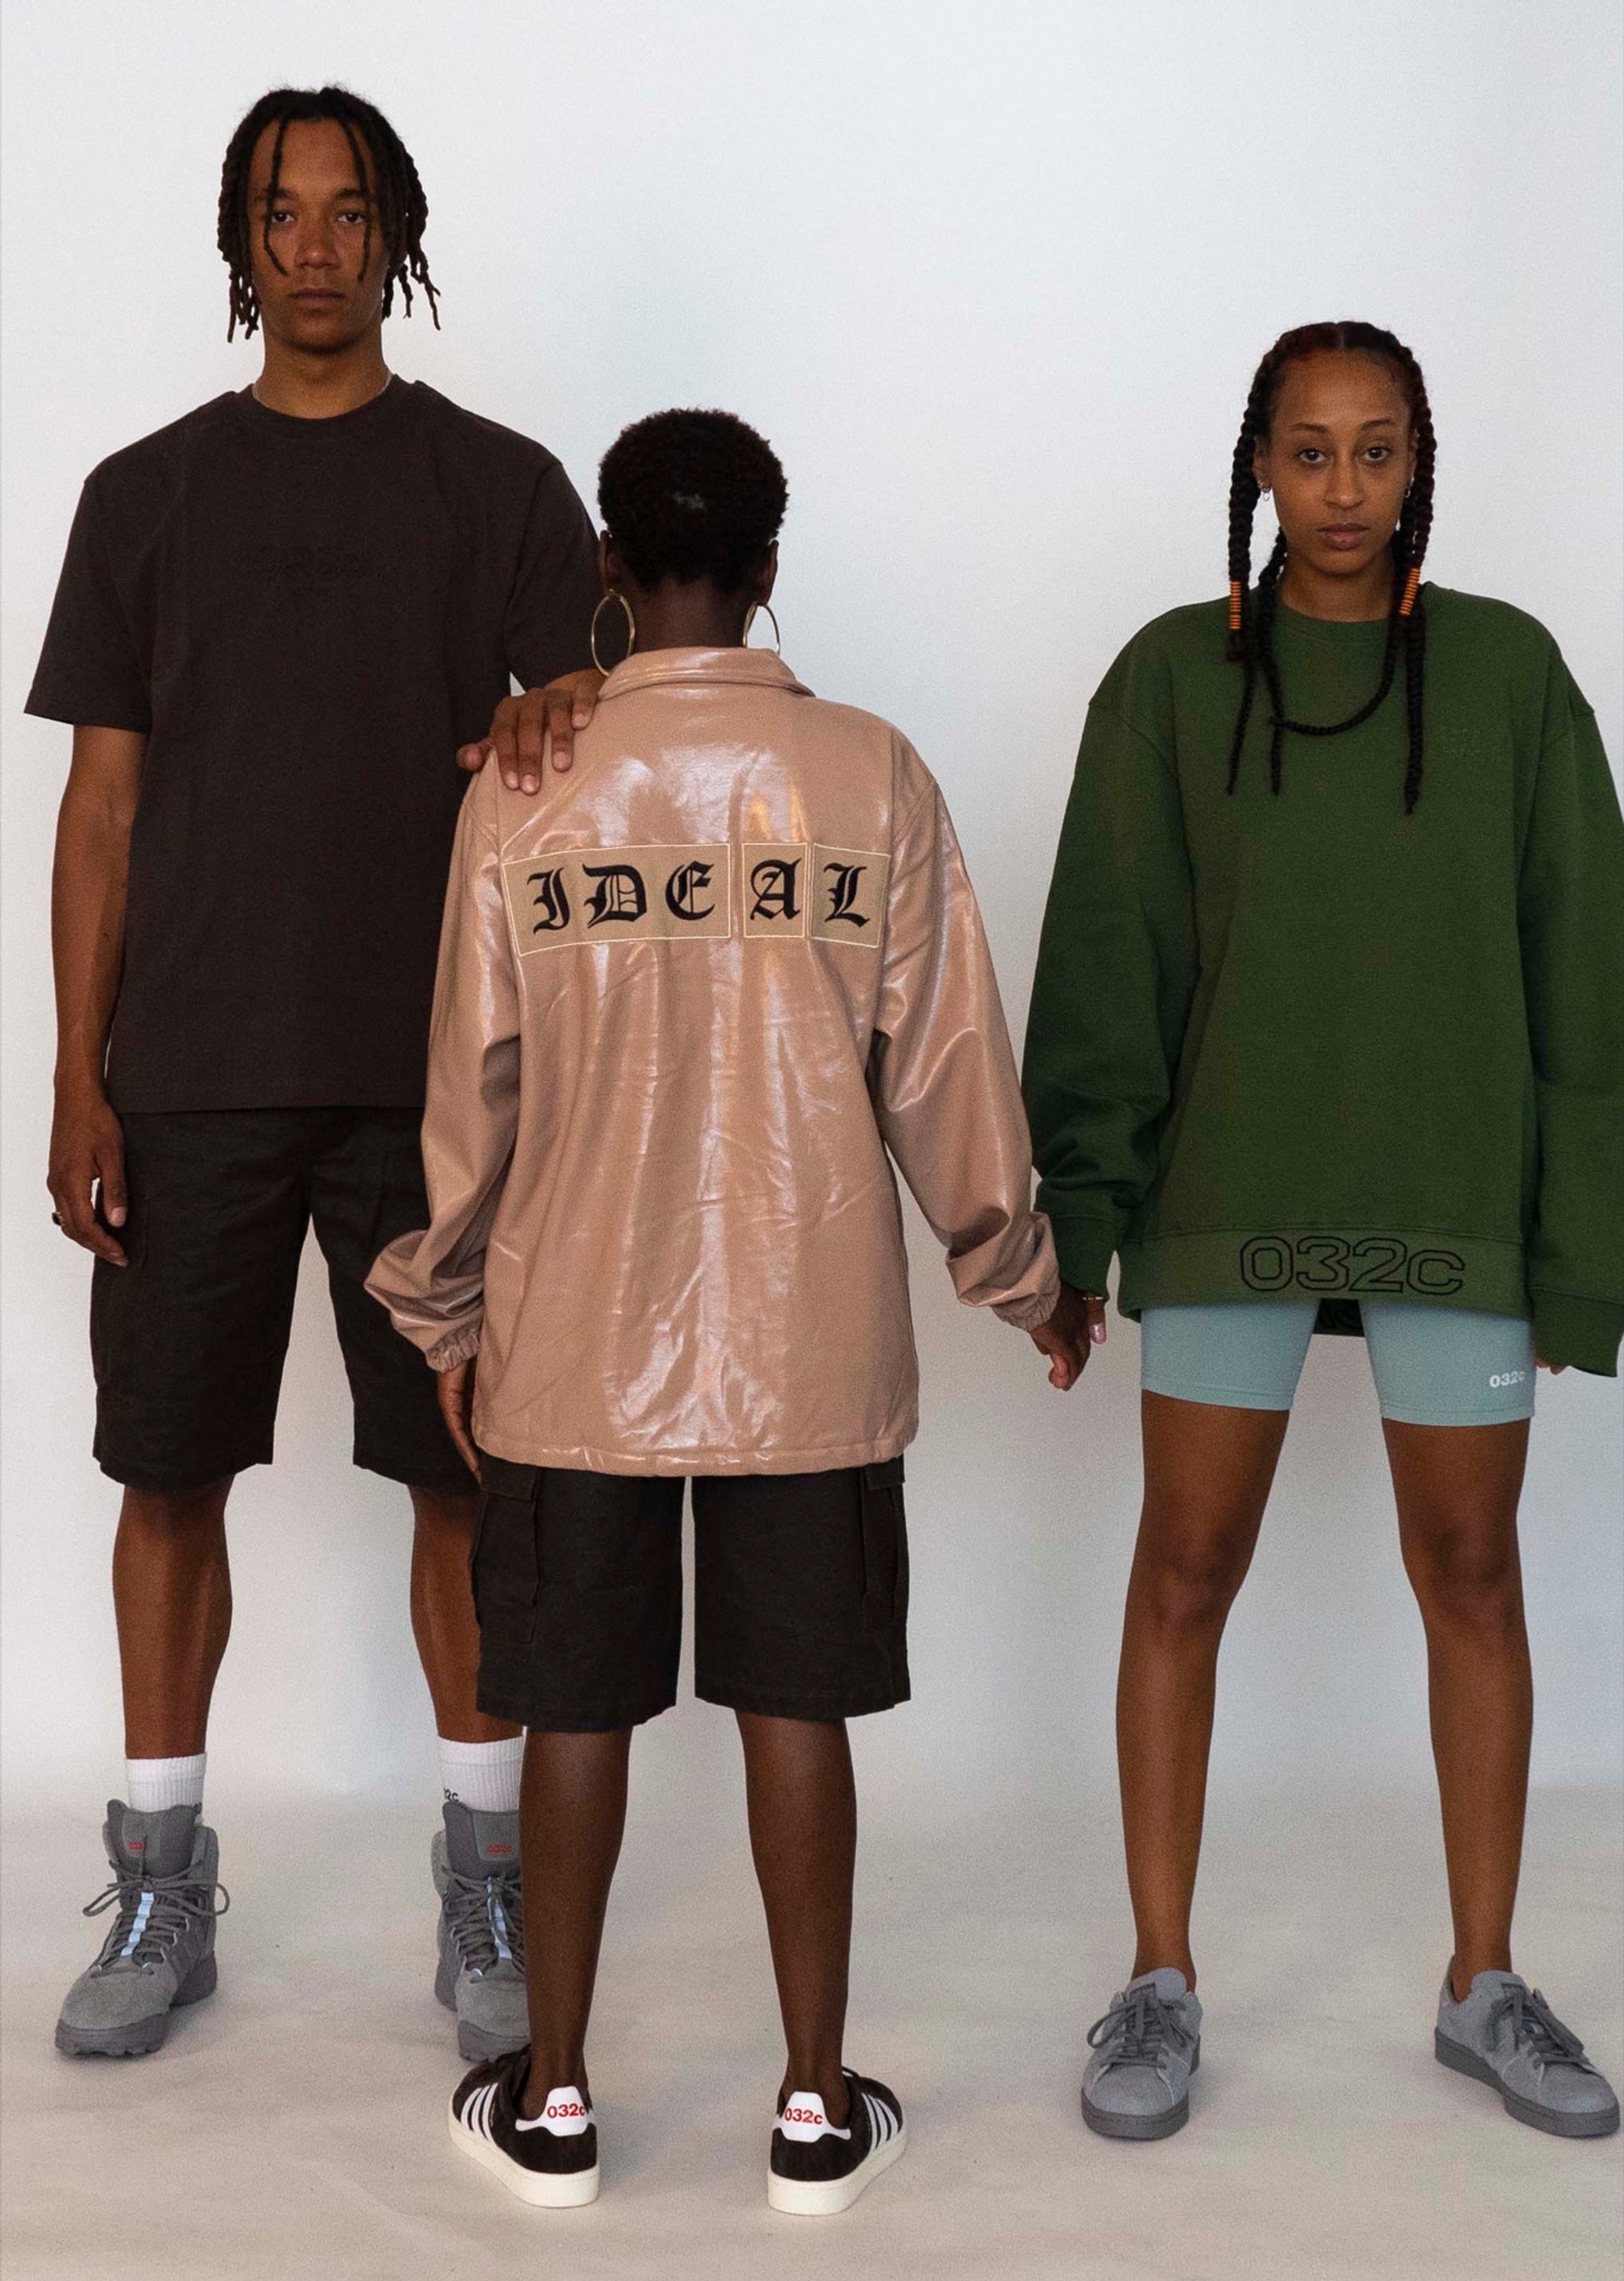 Buyegi wears the 032c LoveSexDreams "FRC" t-shirt in black paired with Cargo Shorts and our 032c x adidas Originals GSG-9High Top Sneaker. Mariama wears the "IDEAL" Coach Jacket in beige and Cargo Shorts. Libell wears the "032c Workshop" Crewneck in olive and neoprene shorts in mint